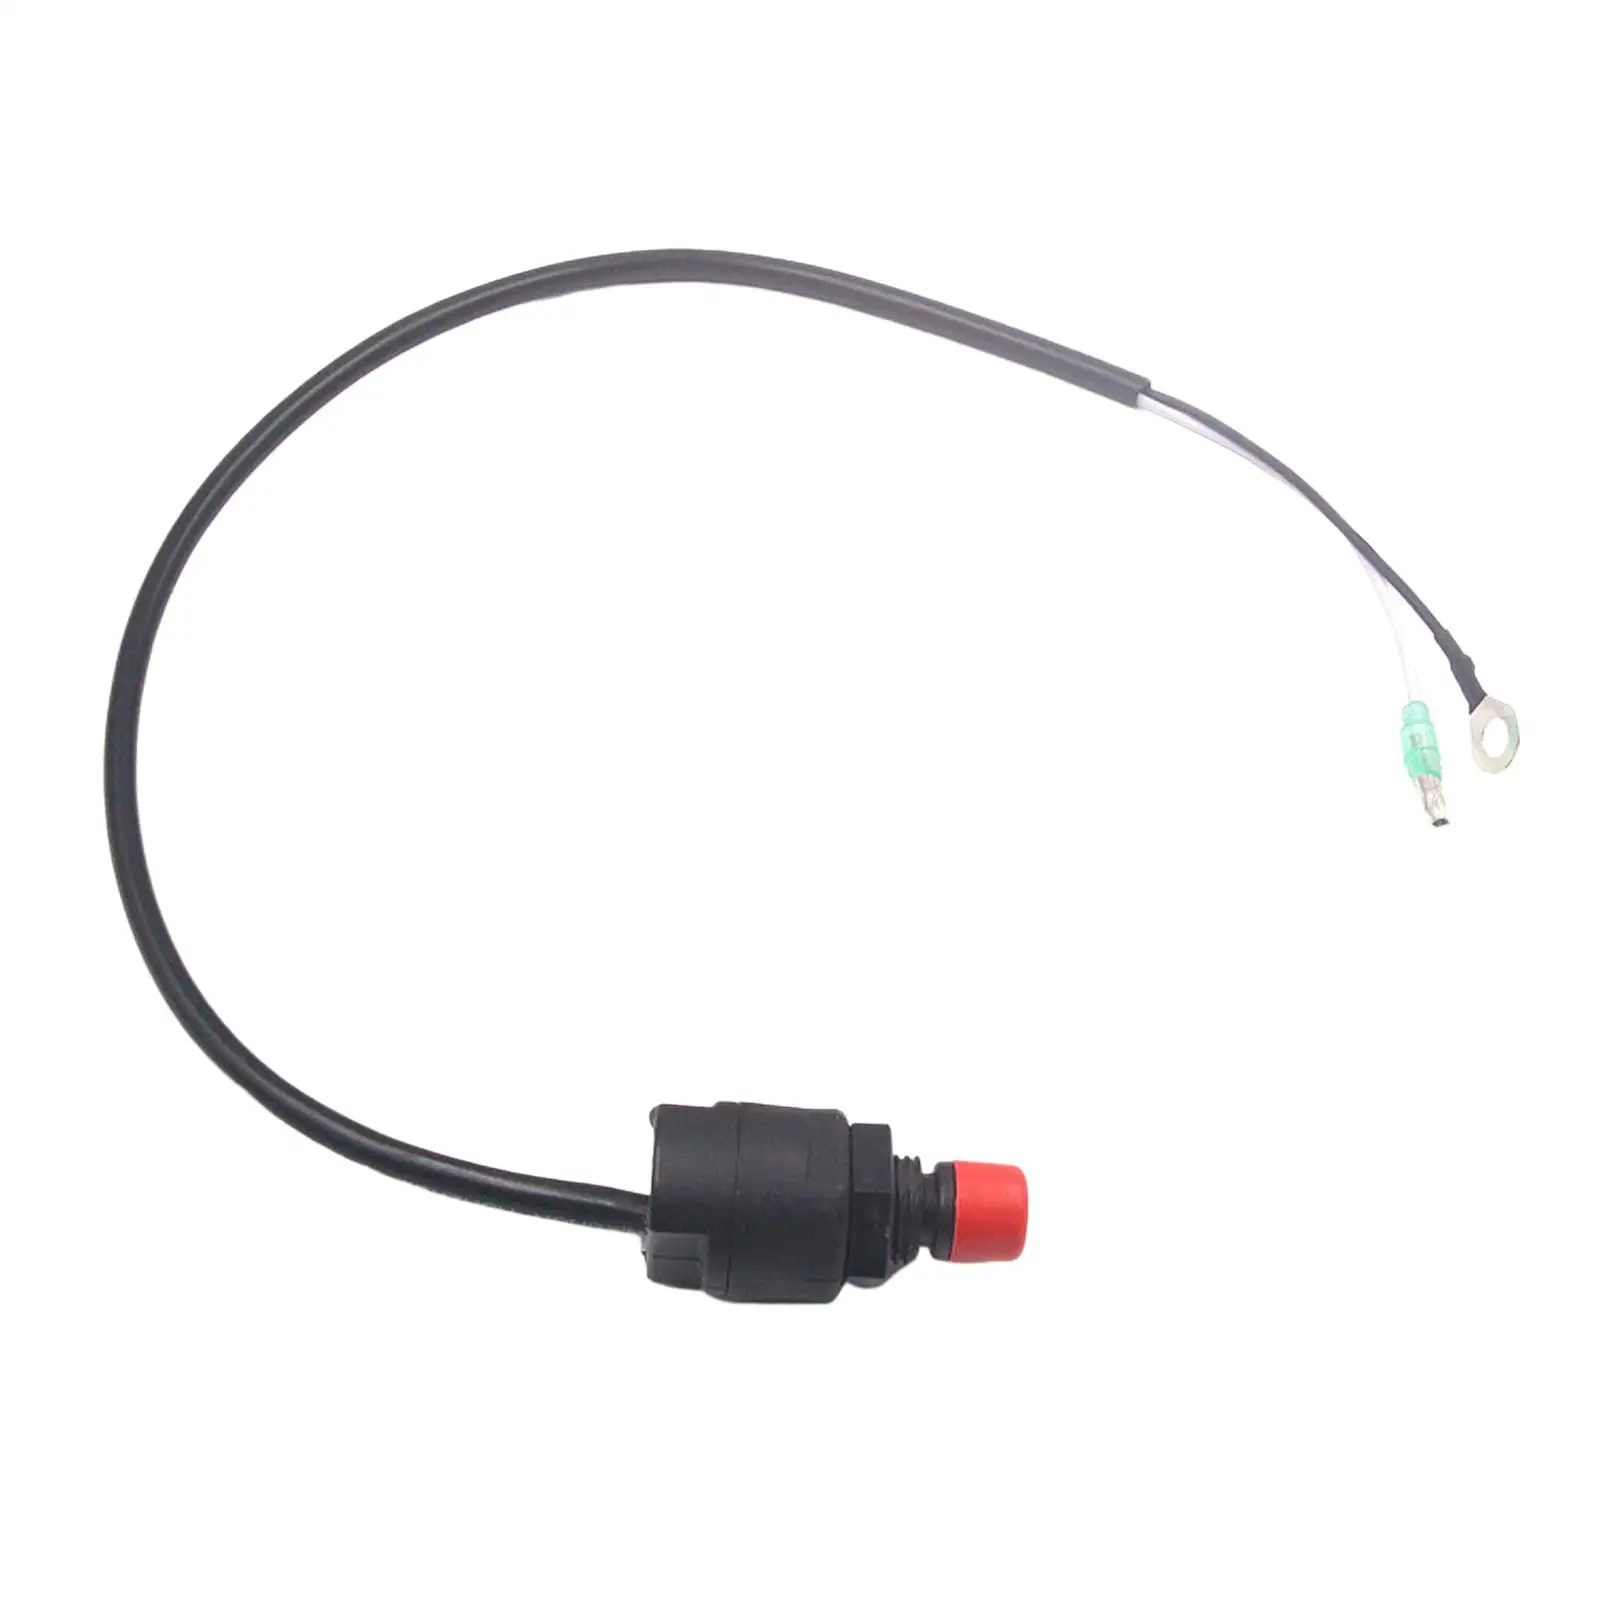 Universal Boat Outboard Switch Replacement Waterproof Engine Motor Kill Urgent Stop Button for Spare Parts Accessory